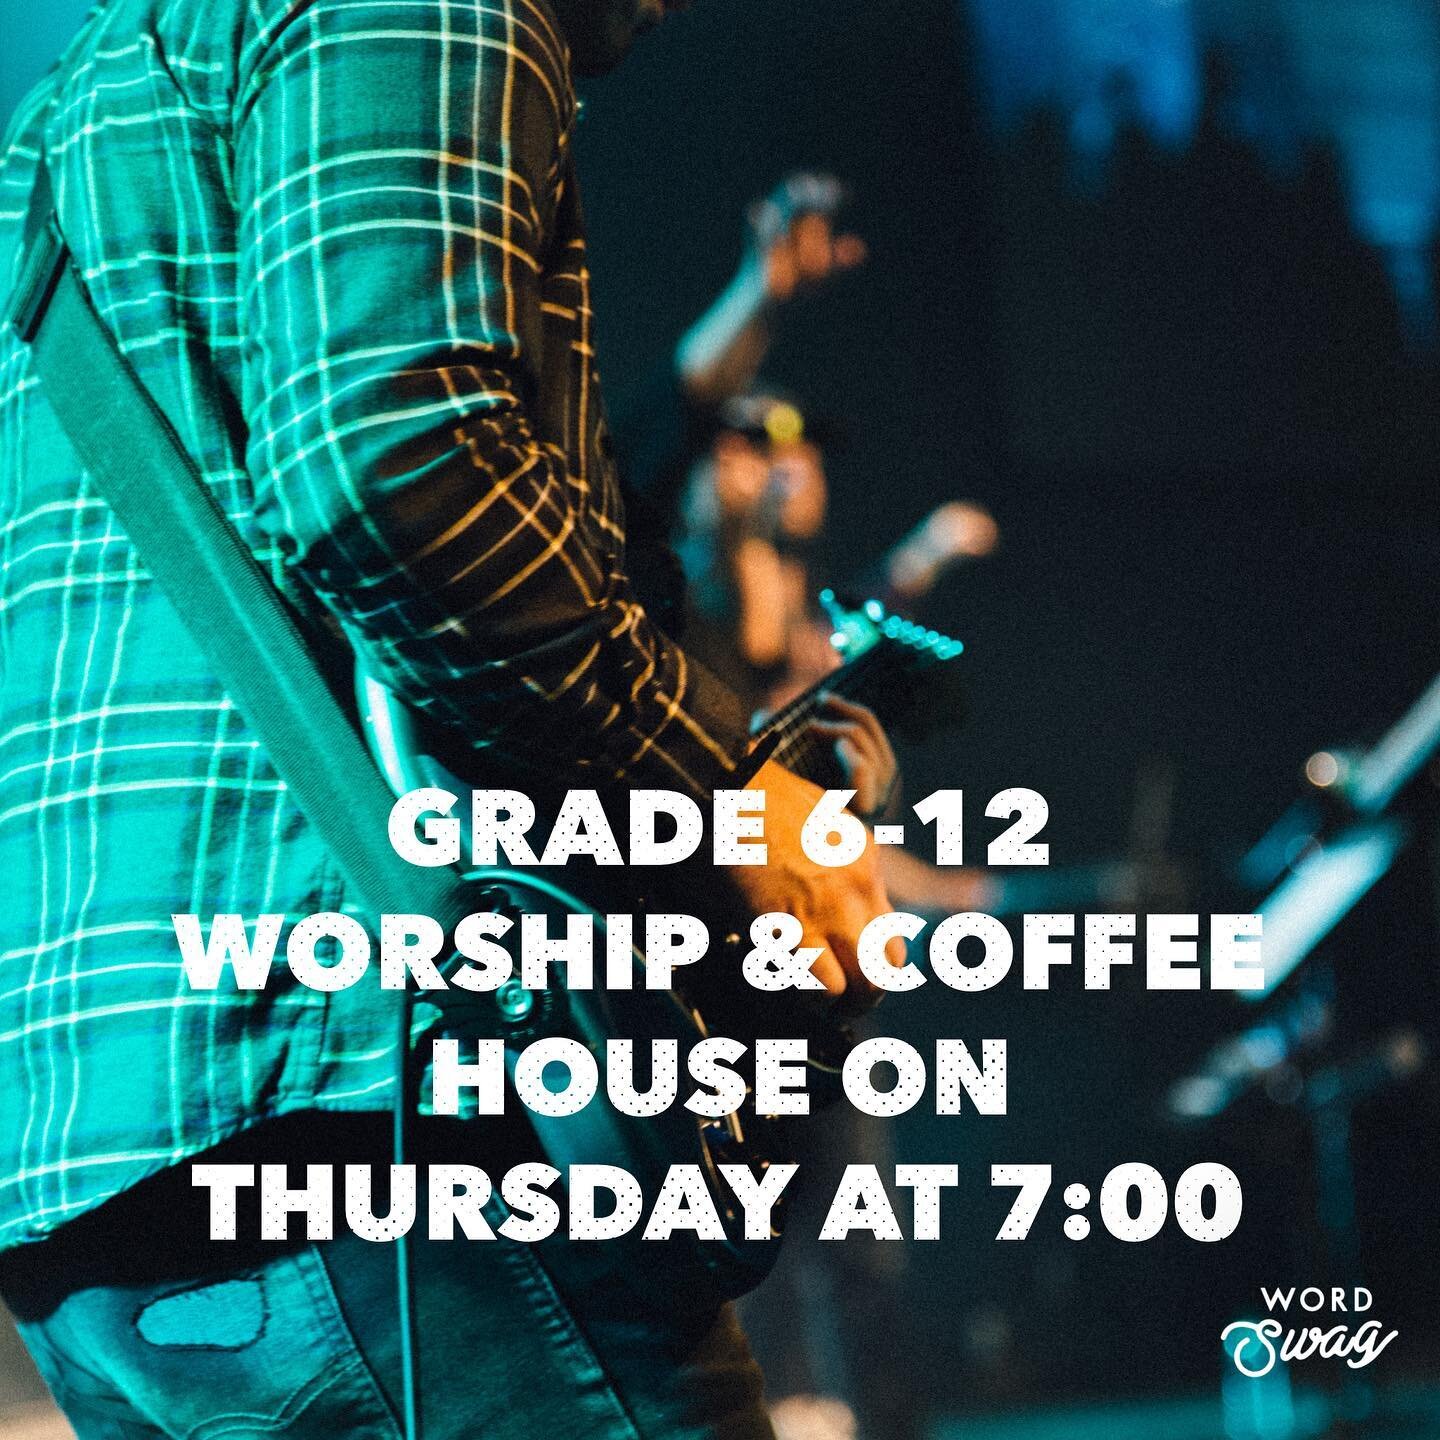 Don&rsquo;t forget about the coffee house this week Thursday!